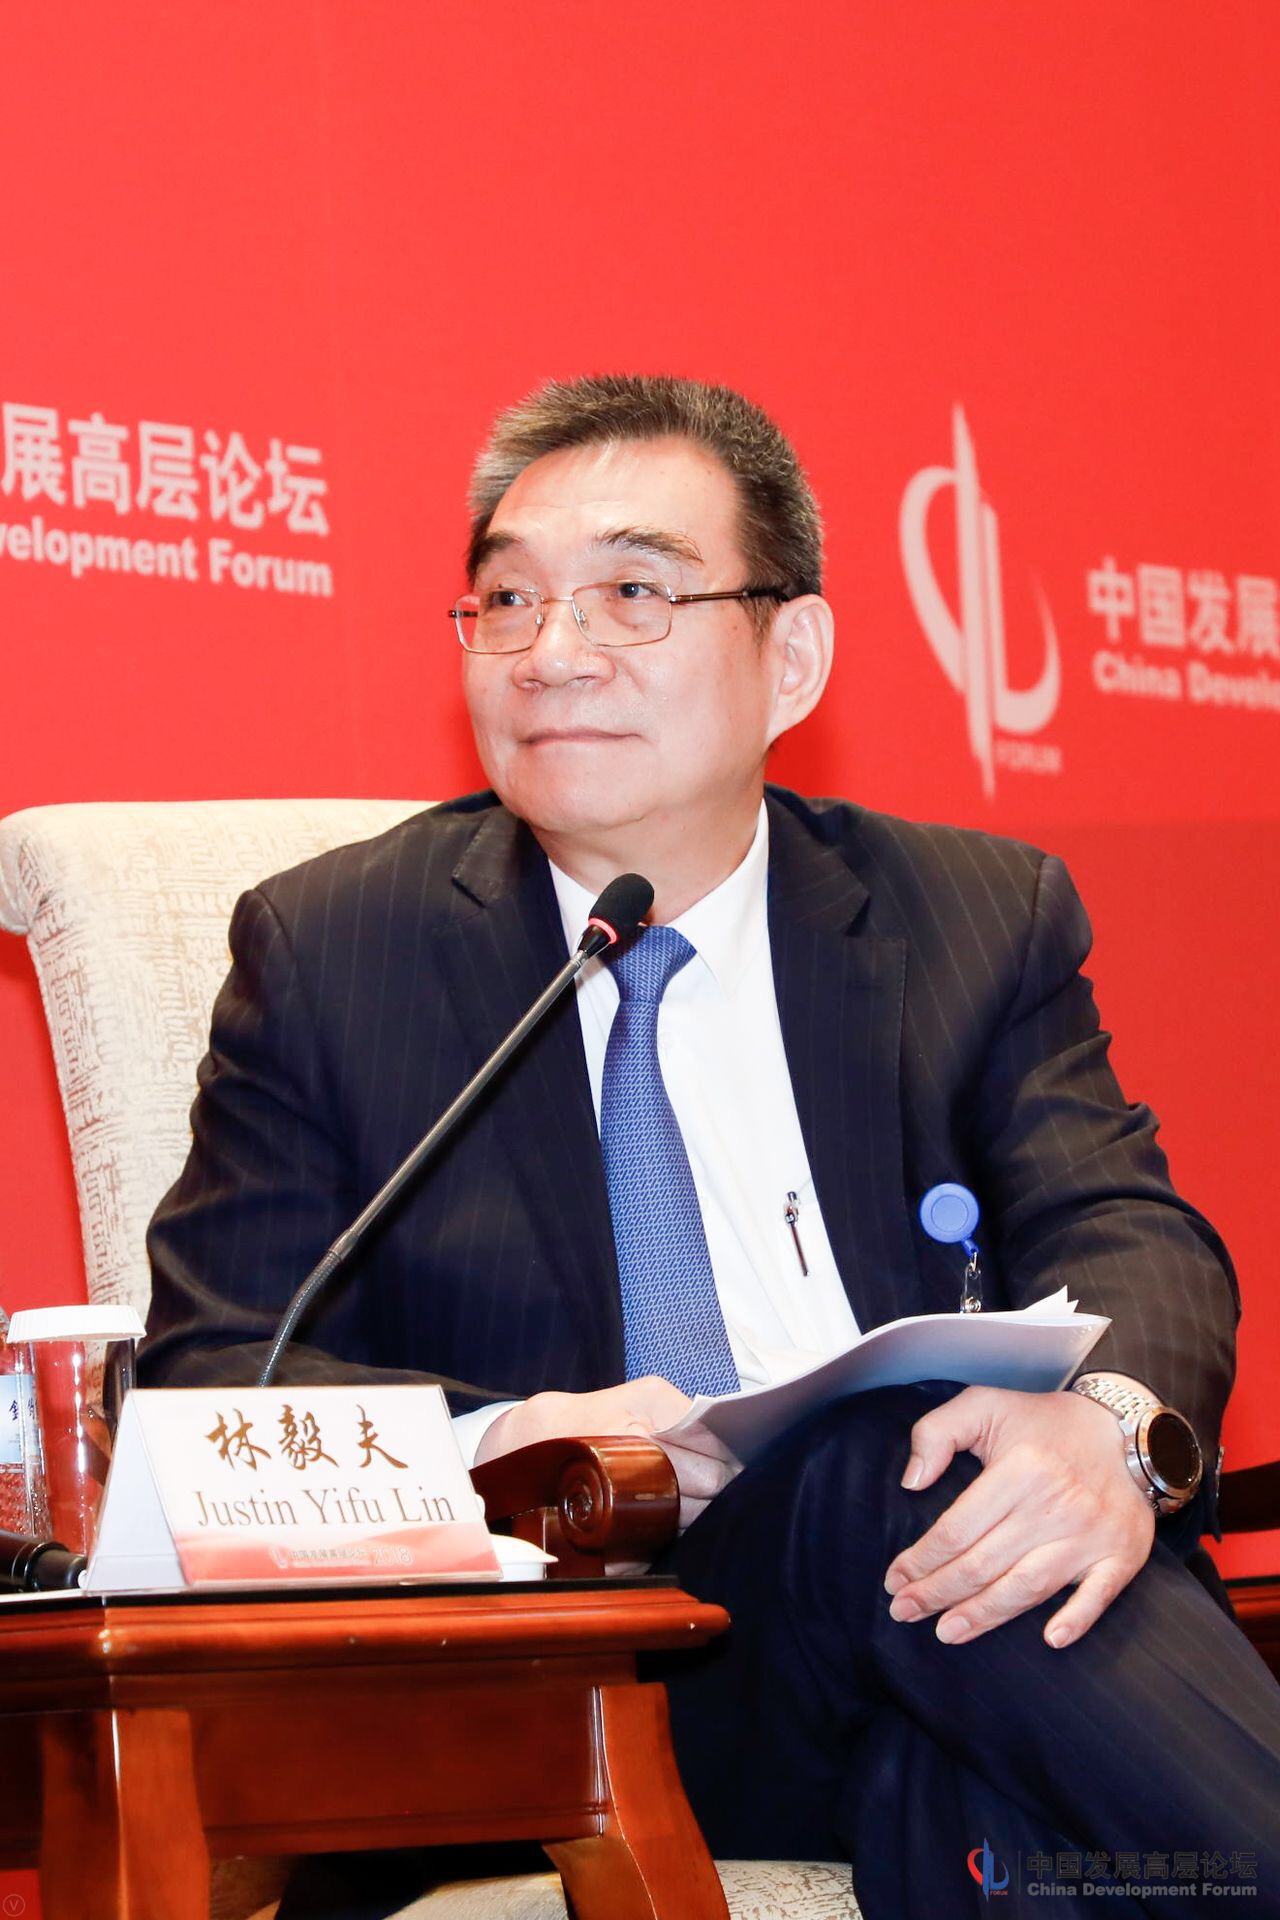 Justin Yifu Lin, former chief economist of World Bank, speaks at a panel on China’s reform and opening up in Beijing on Mar. 24. [Photo courtesy of China Development Forum]